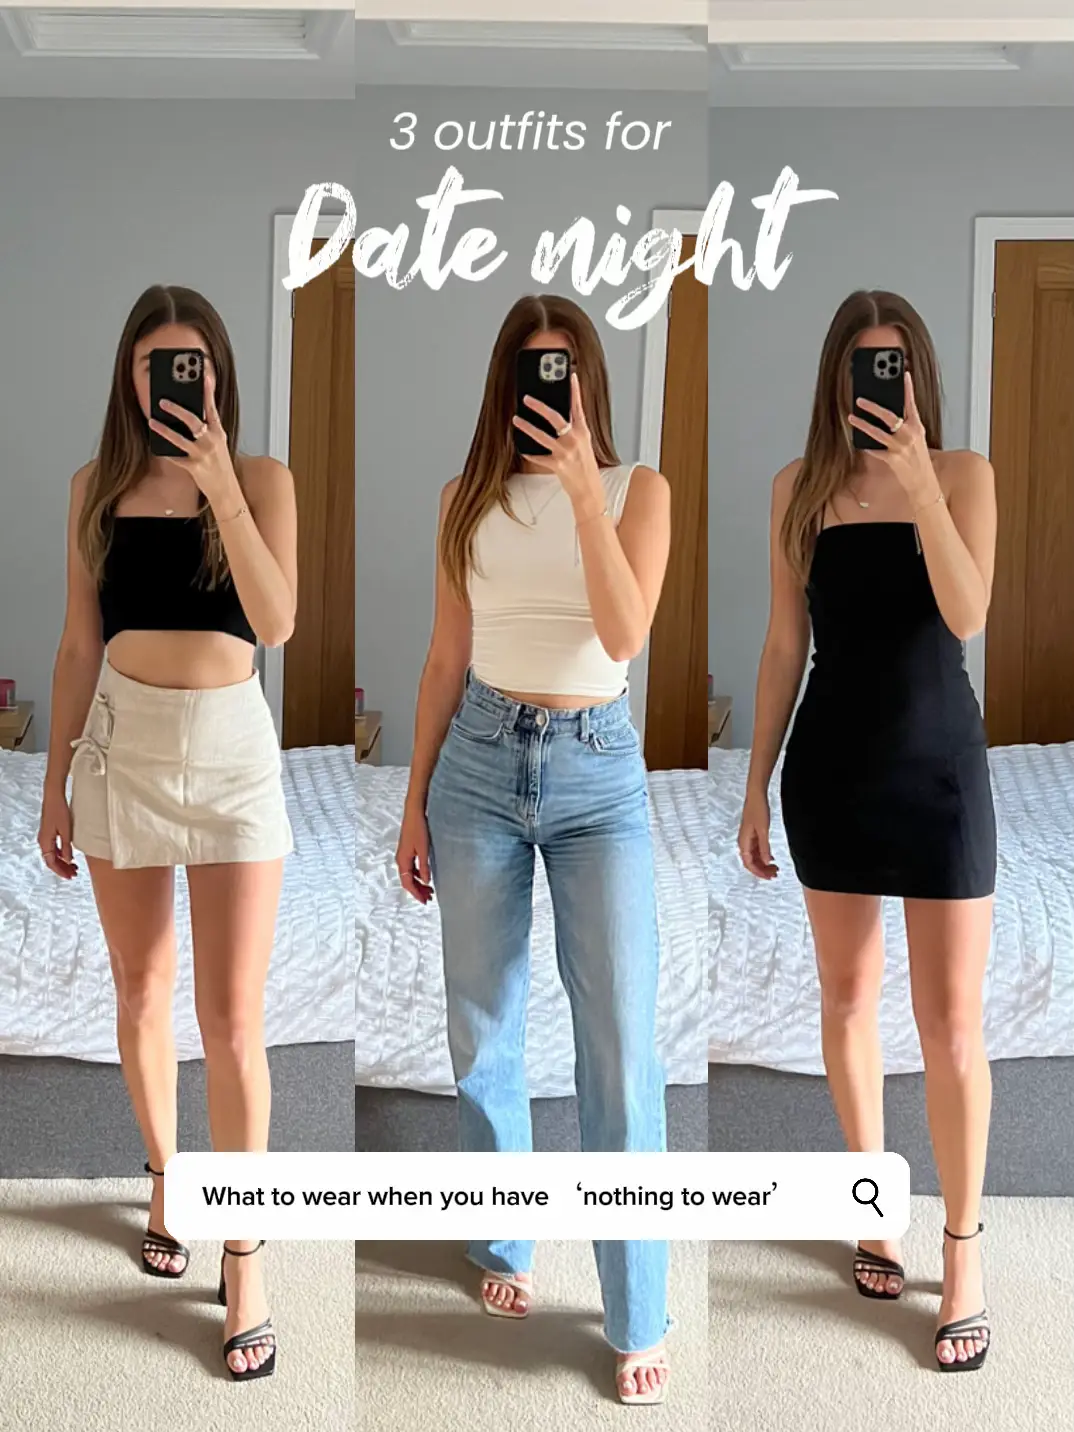 3 outfit ideas for a date night 🥰🫶🏻🥂, Gallery posted by Lia Sophie